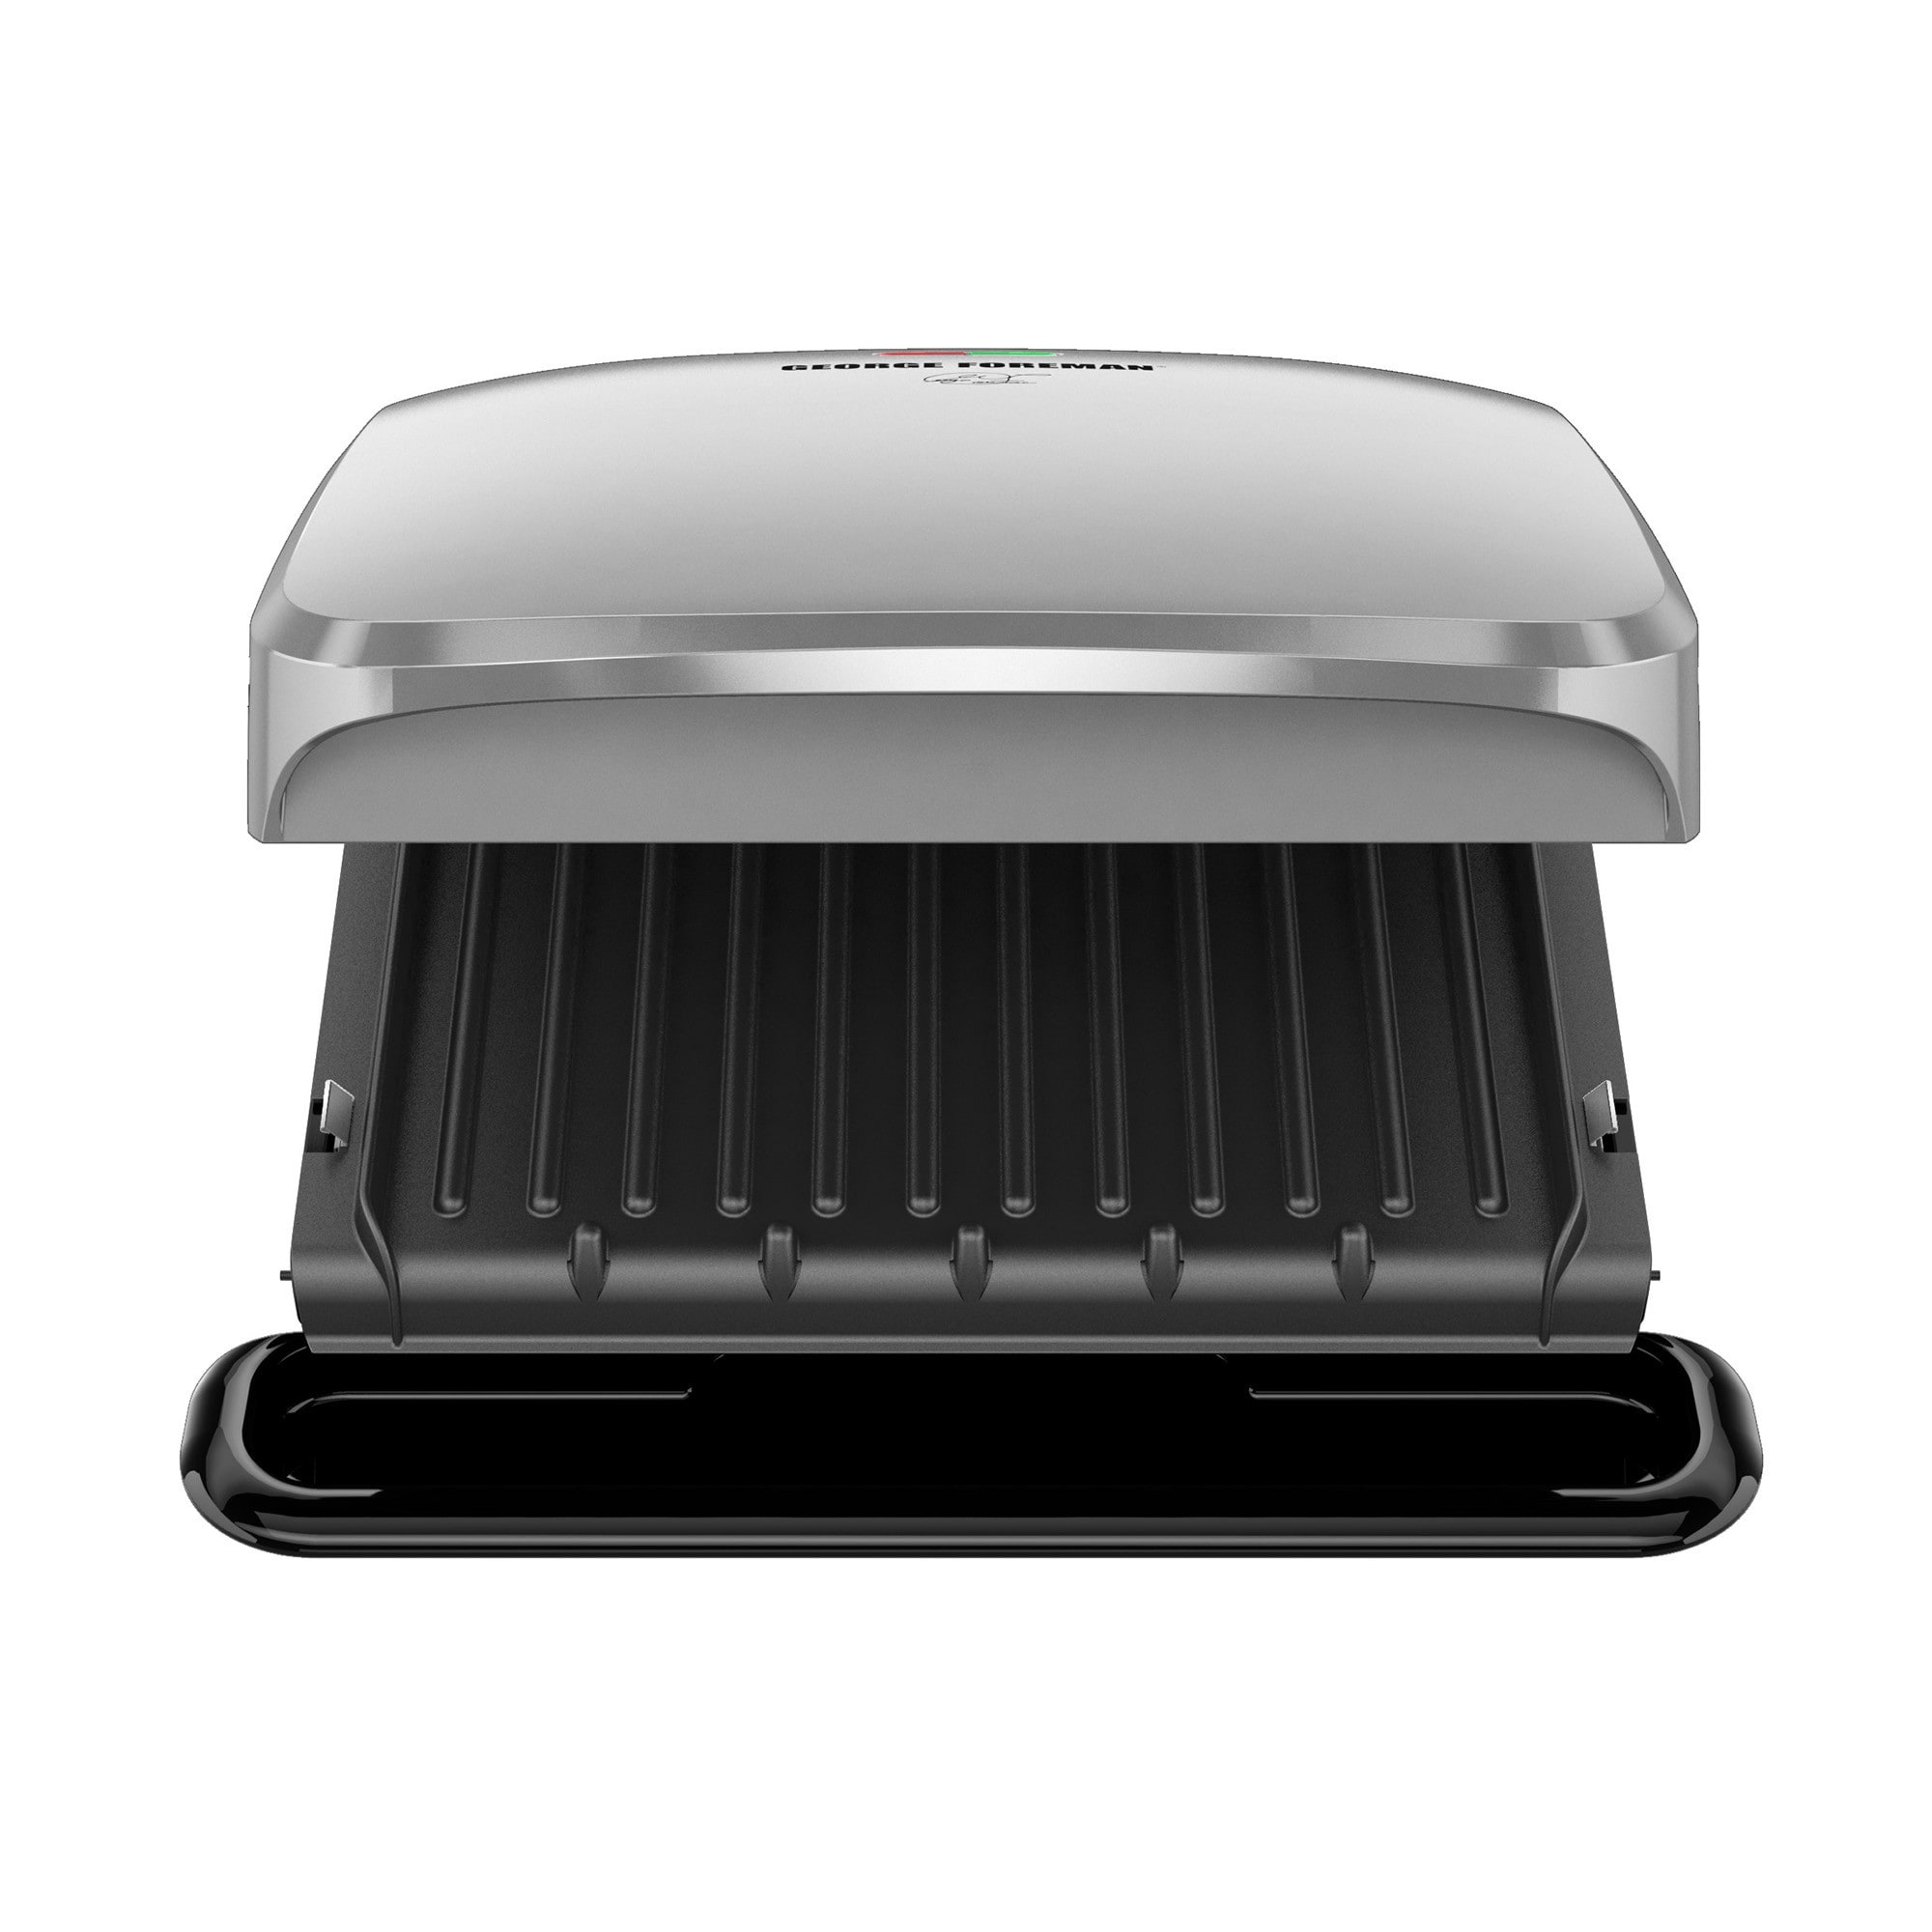 George Foreman 14525 4-Portion Family Grill and Melt with